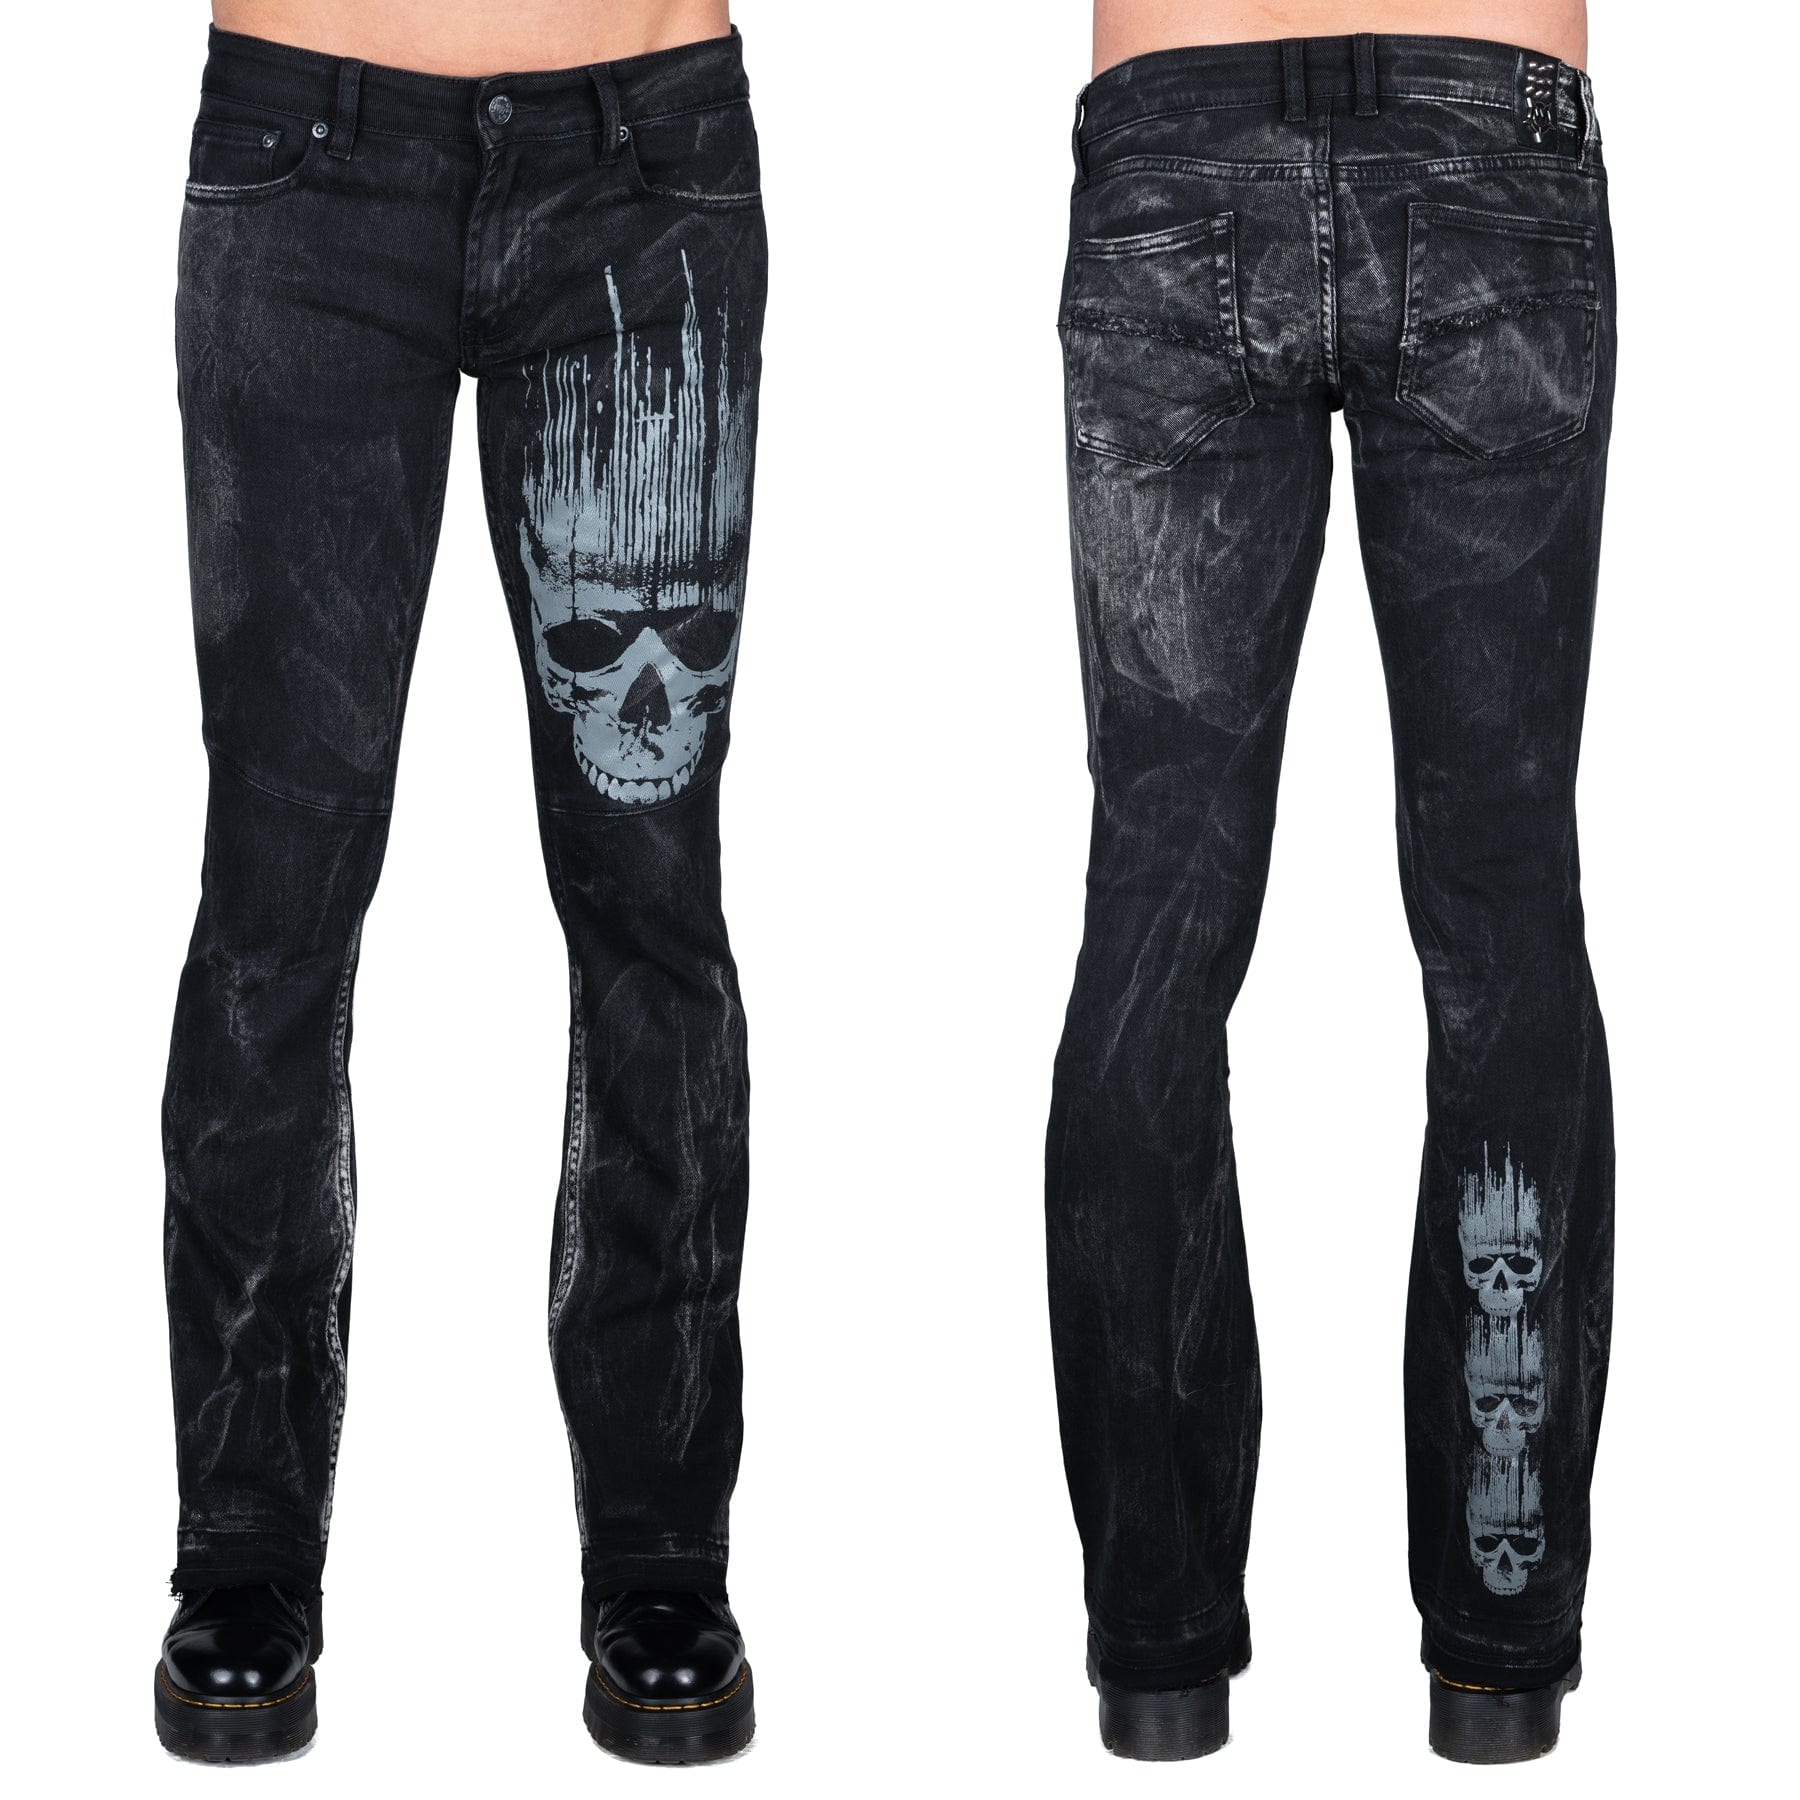 All Access Collection Pants Headhunter Jeans